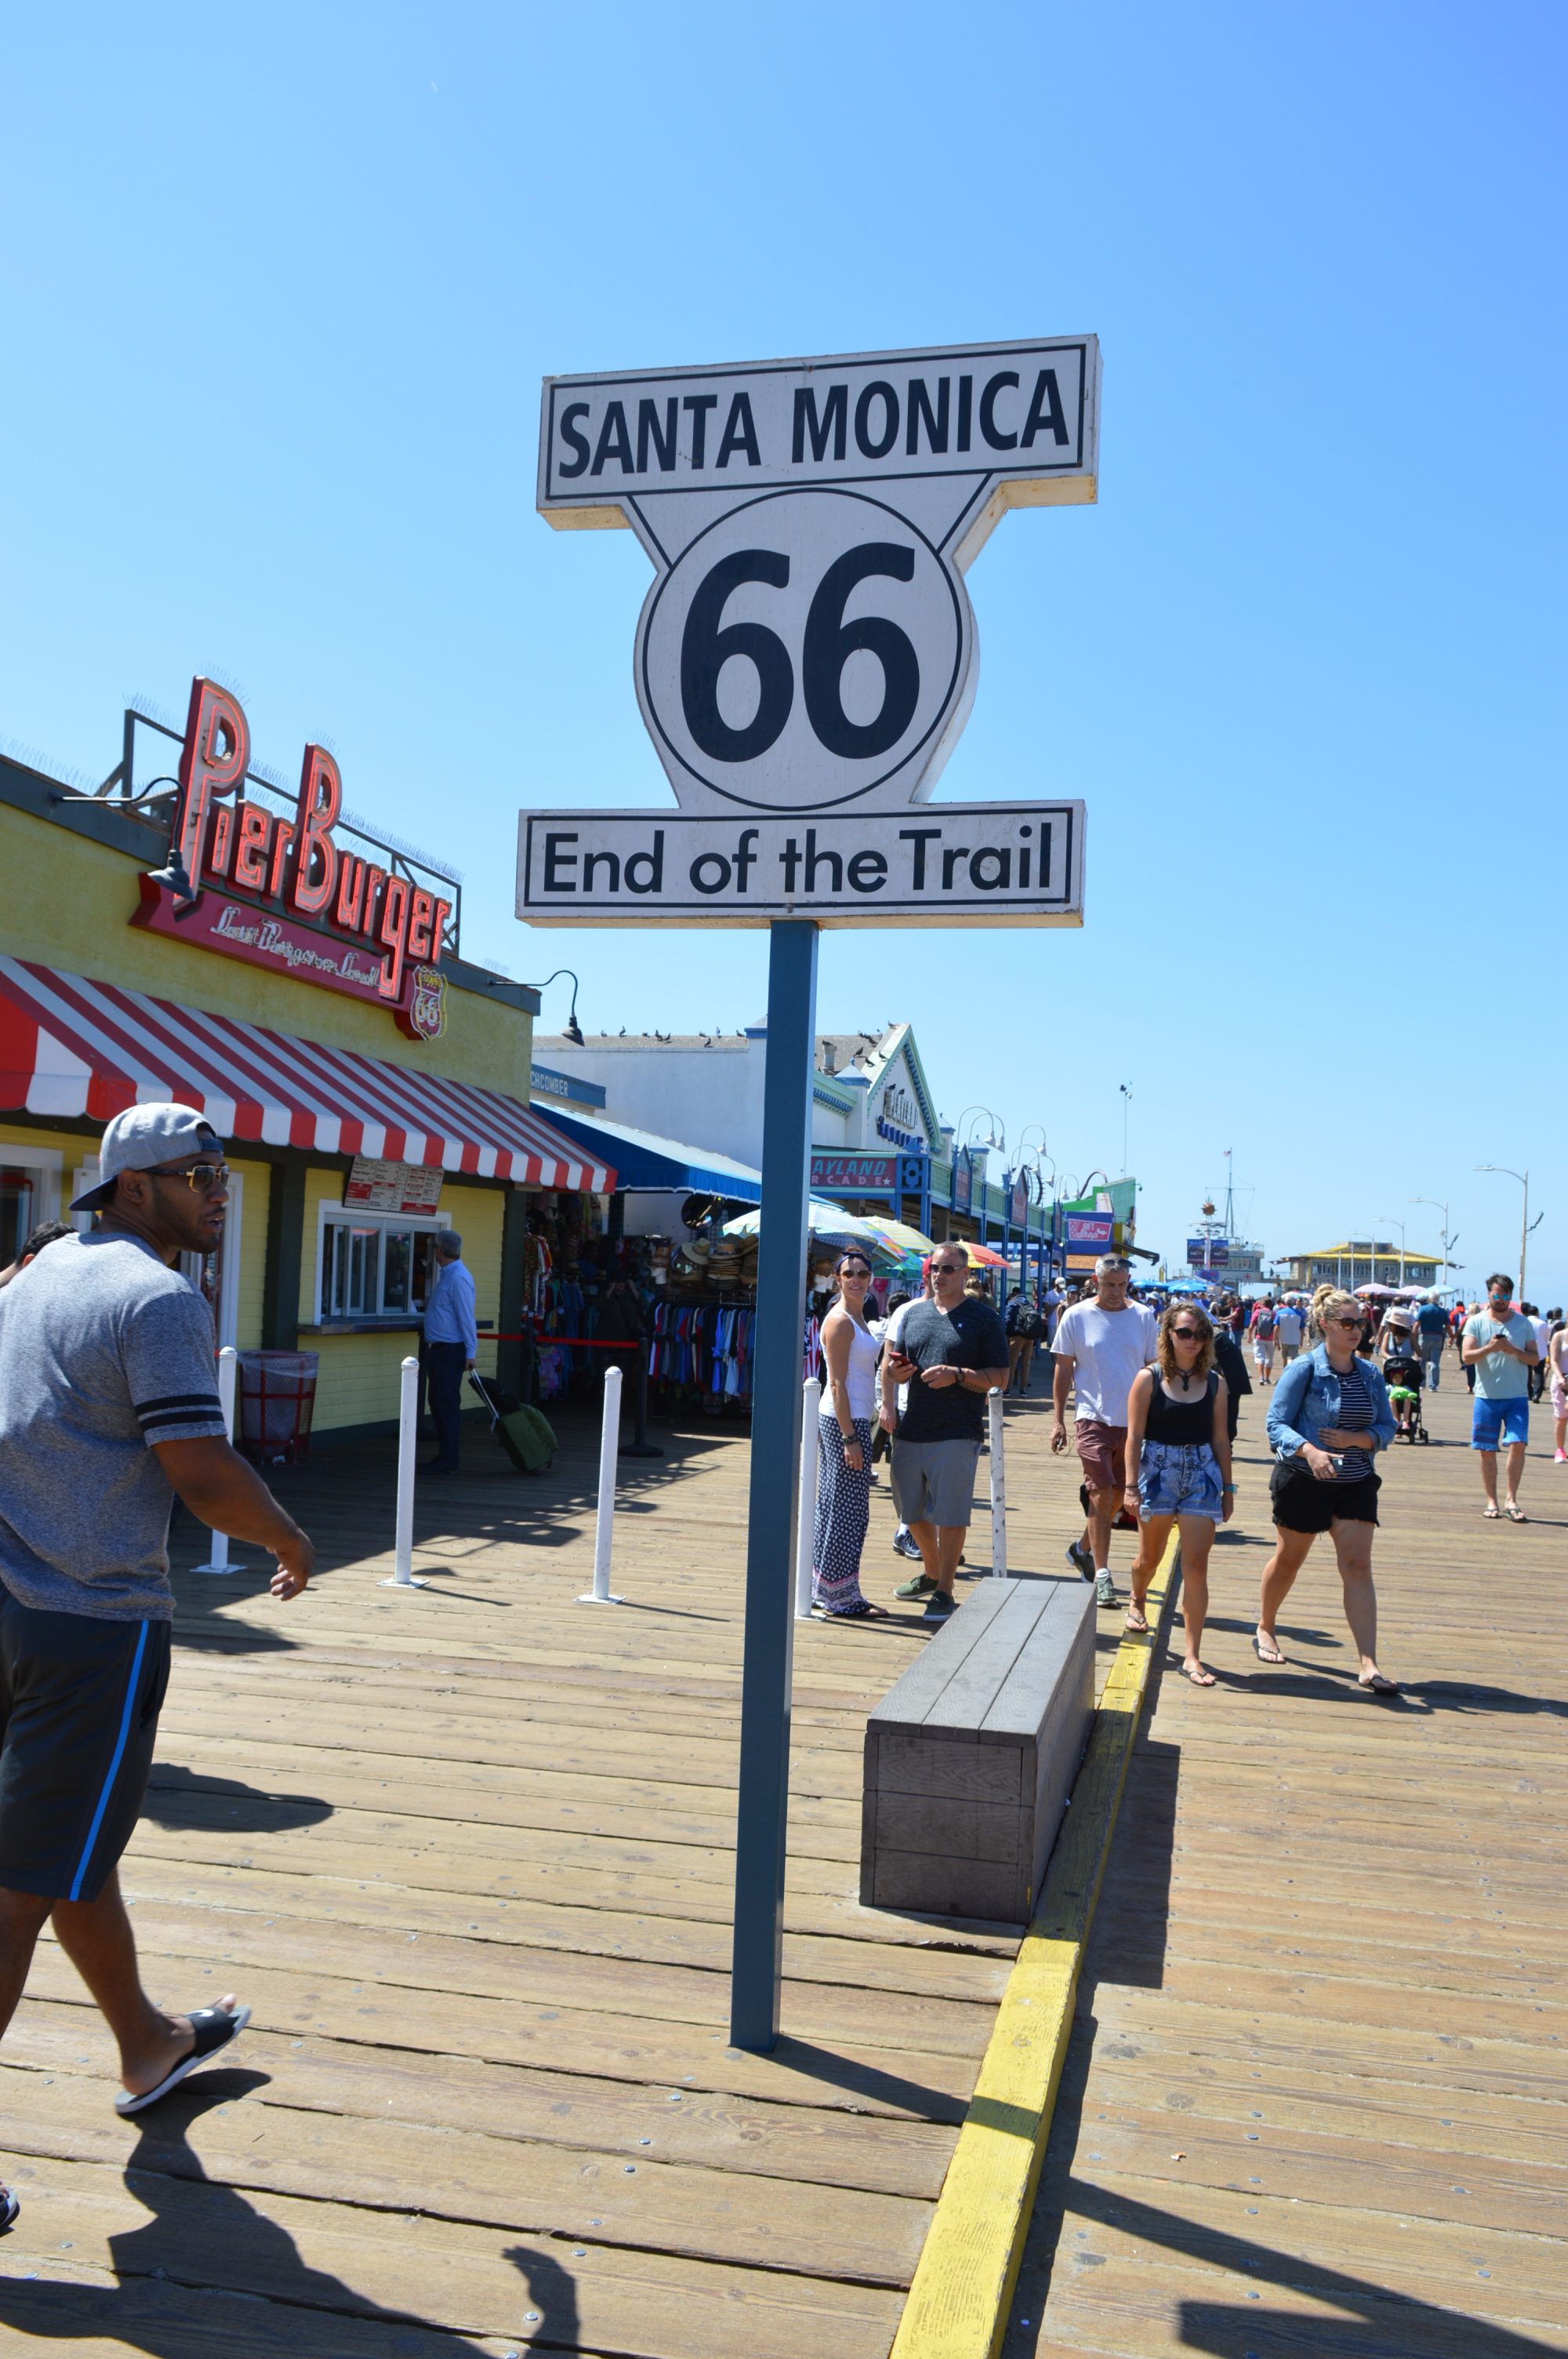 Santa Monica Route 66 End of the Trail Sign